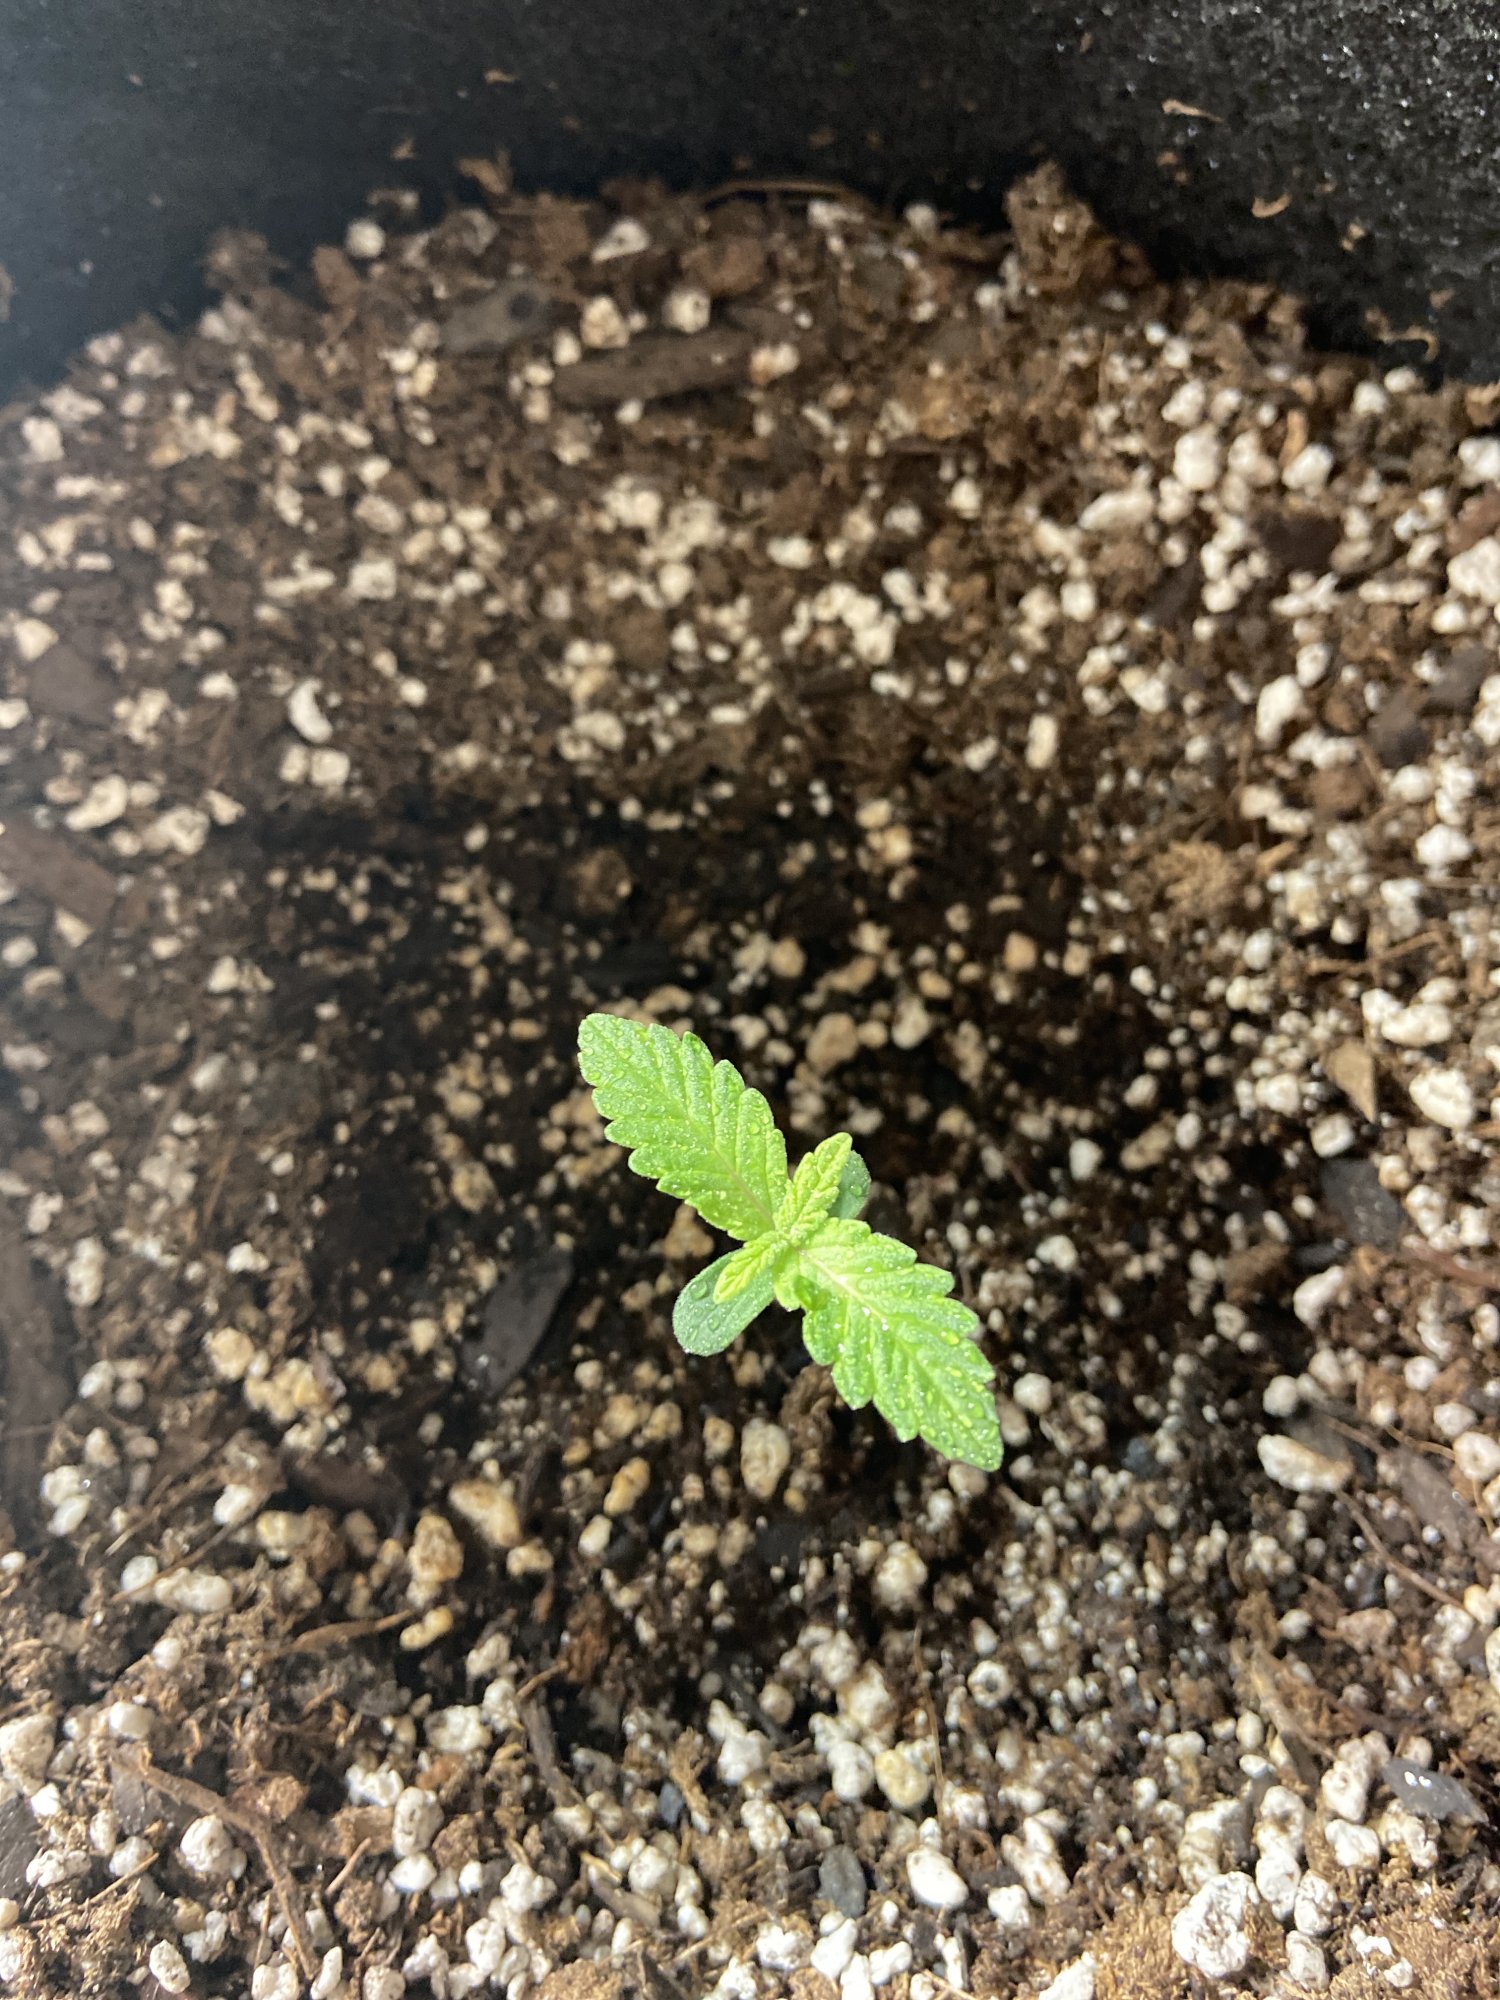 Frustrating second grow starting way slow 2